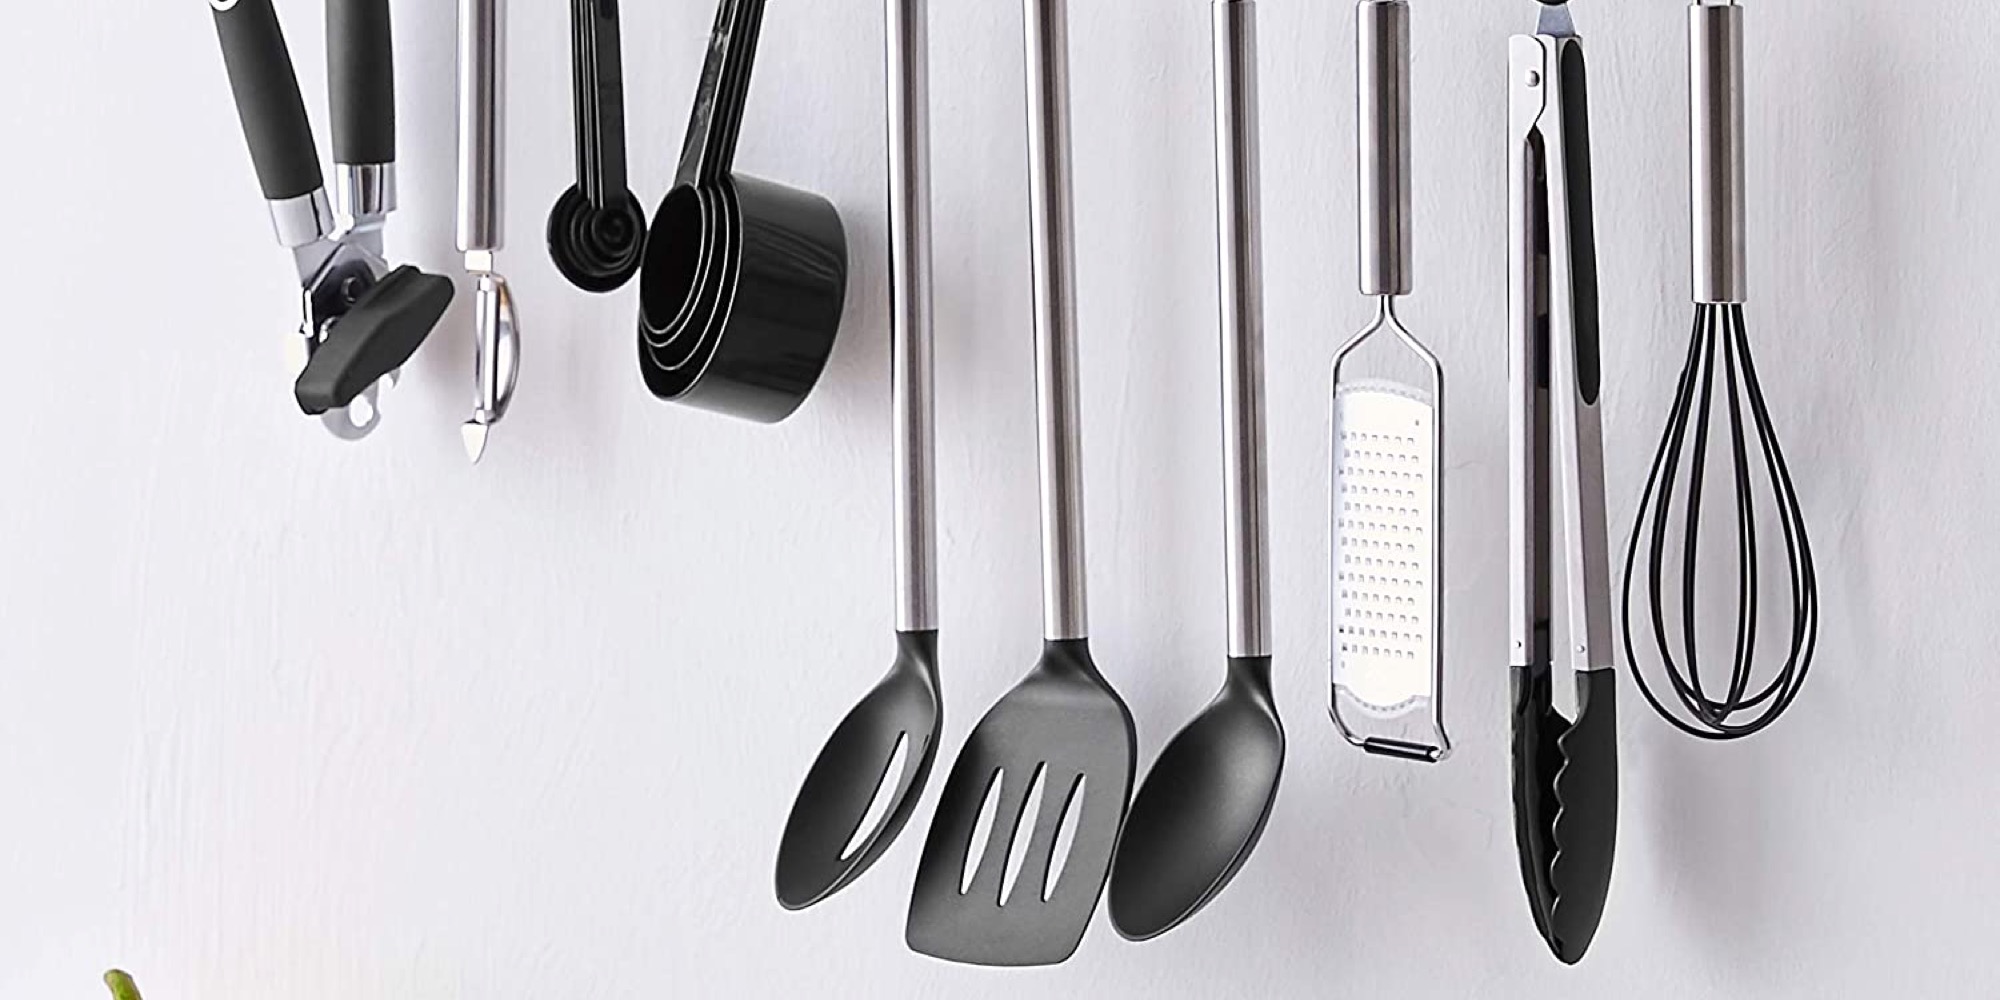  Amazon  s very affordable 17 Pc Kitchen  Set  falls under 